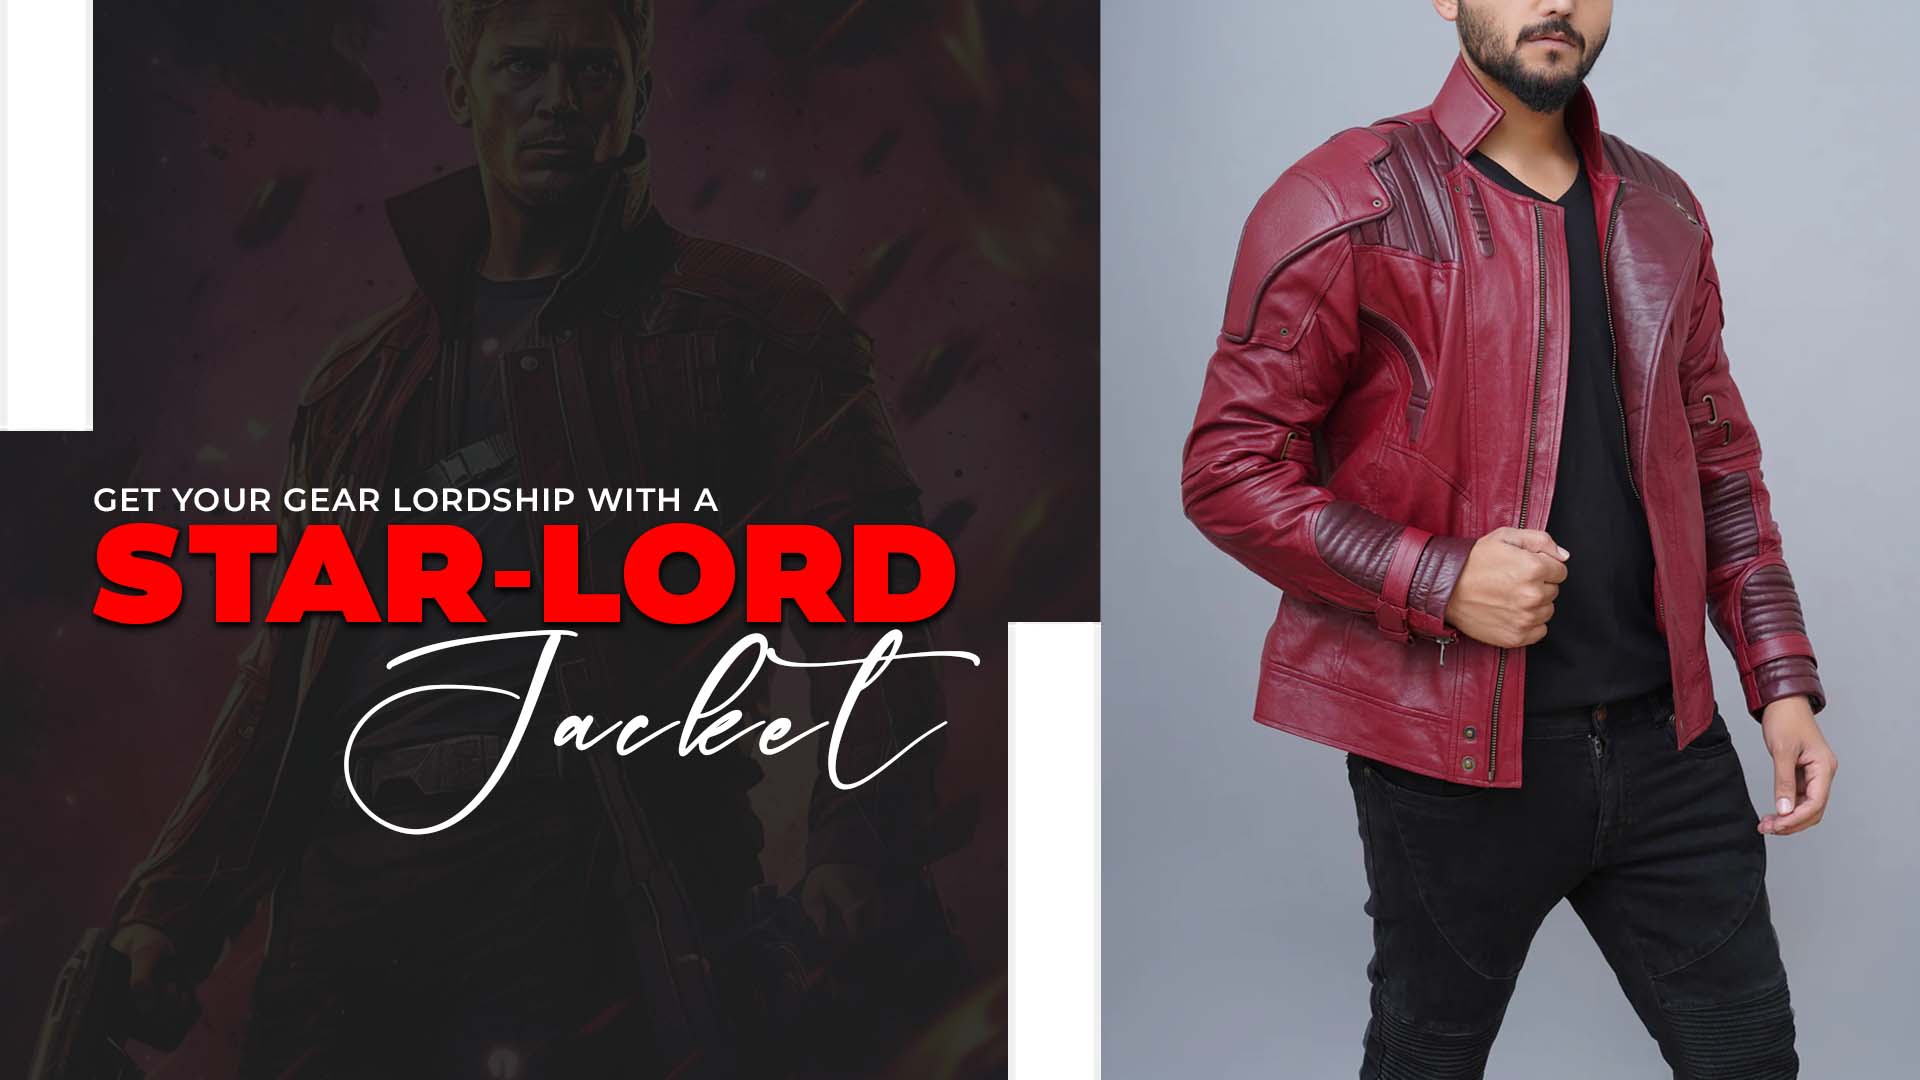 Get your Gear Lordship with a Star-Lord Jacket